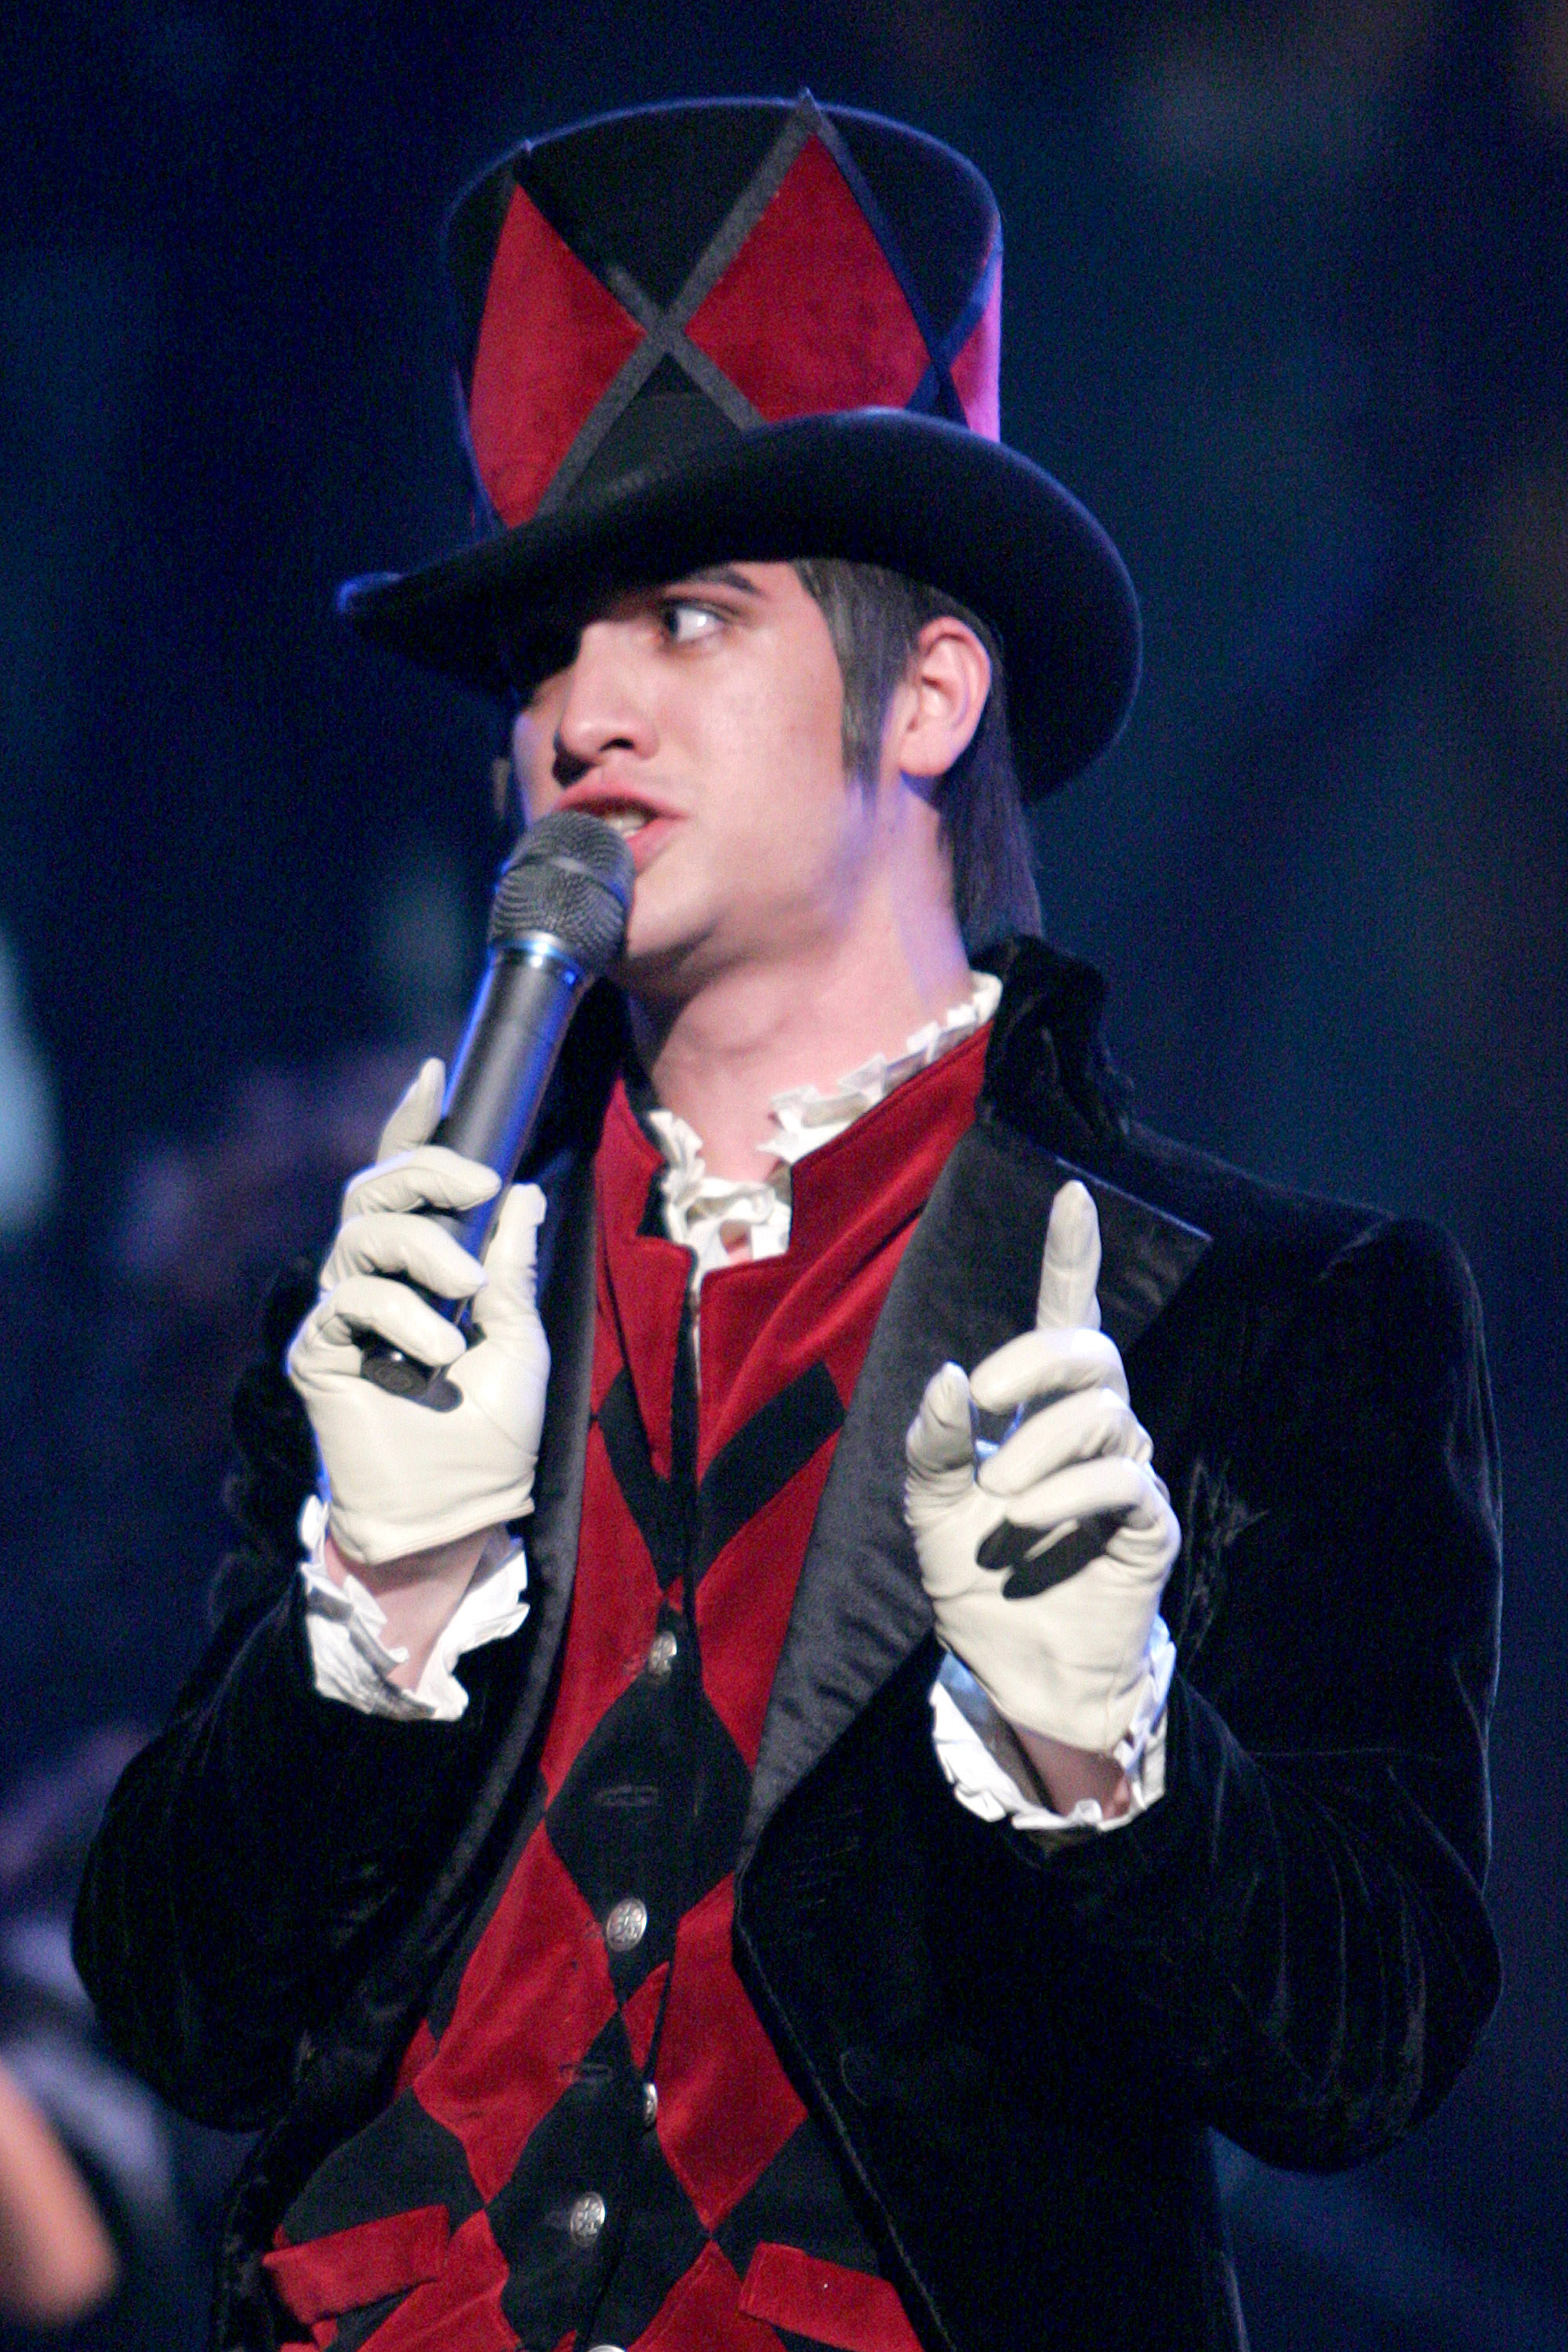 Brendon Urie performing on stage